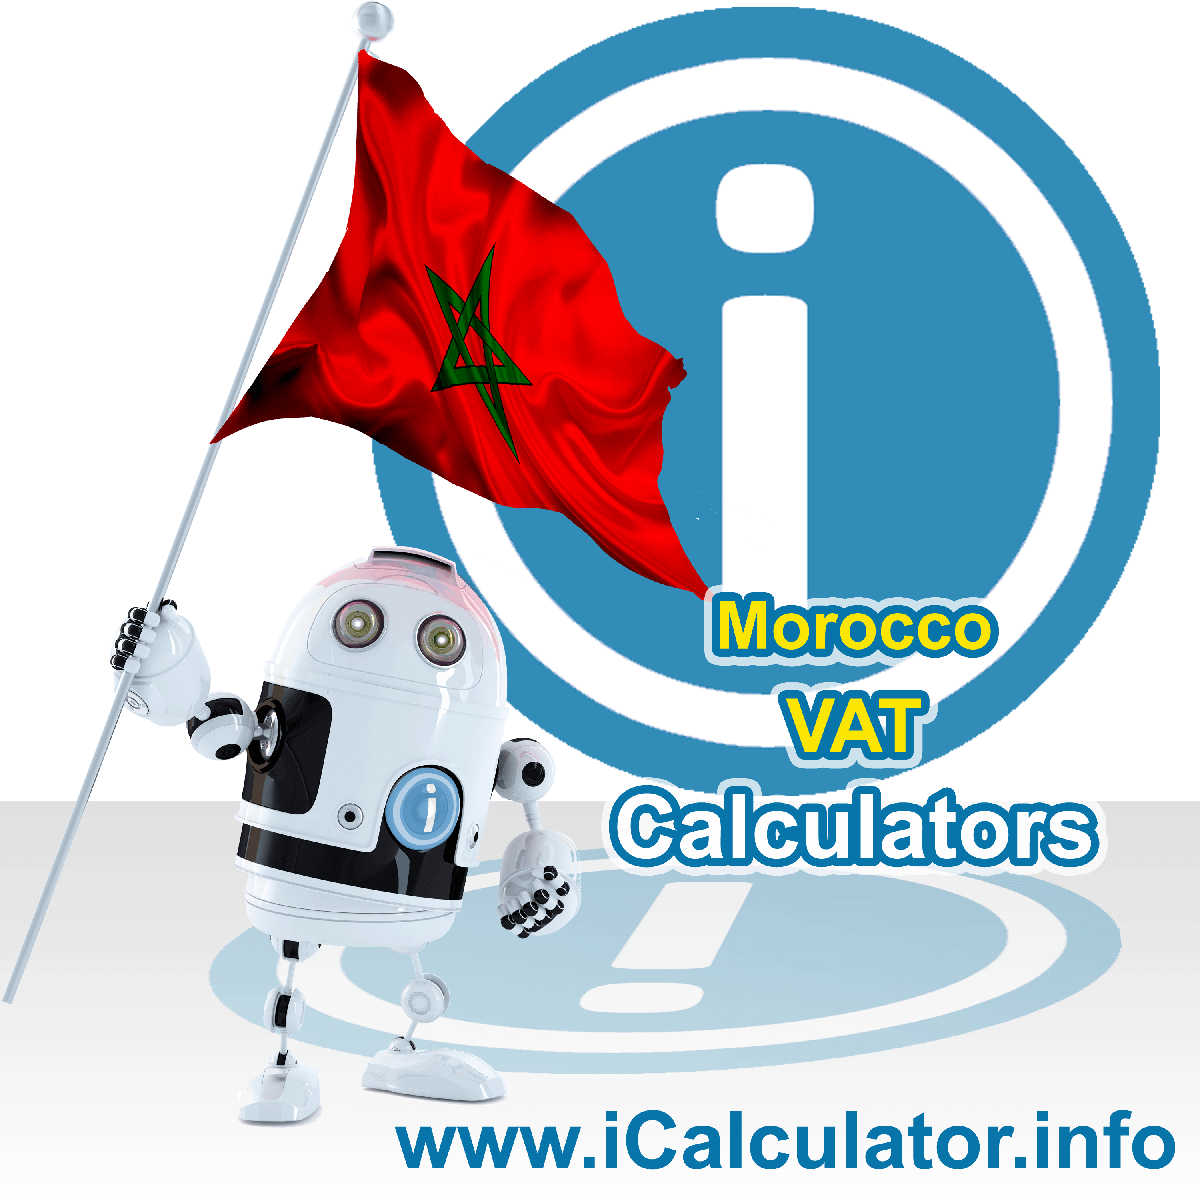 Morocco VAT Calculator. This image shows the Morocco flag and information relating to the VAT formula used for calculating Value Added Tax in Morocco using the Morocco VAT Calculator in 2023